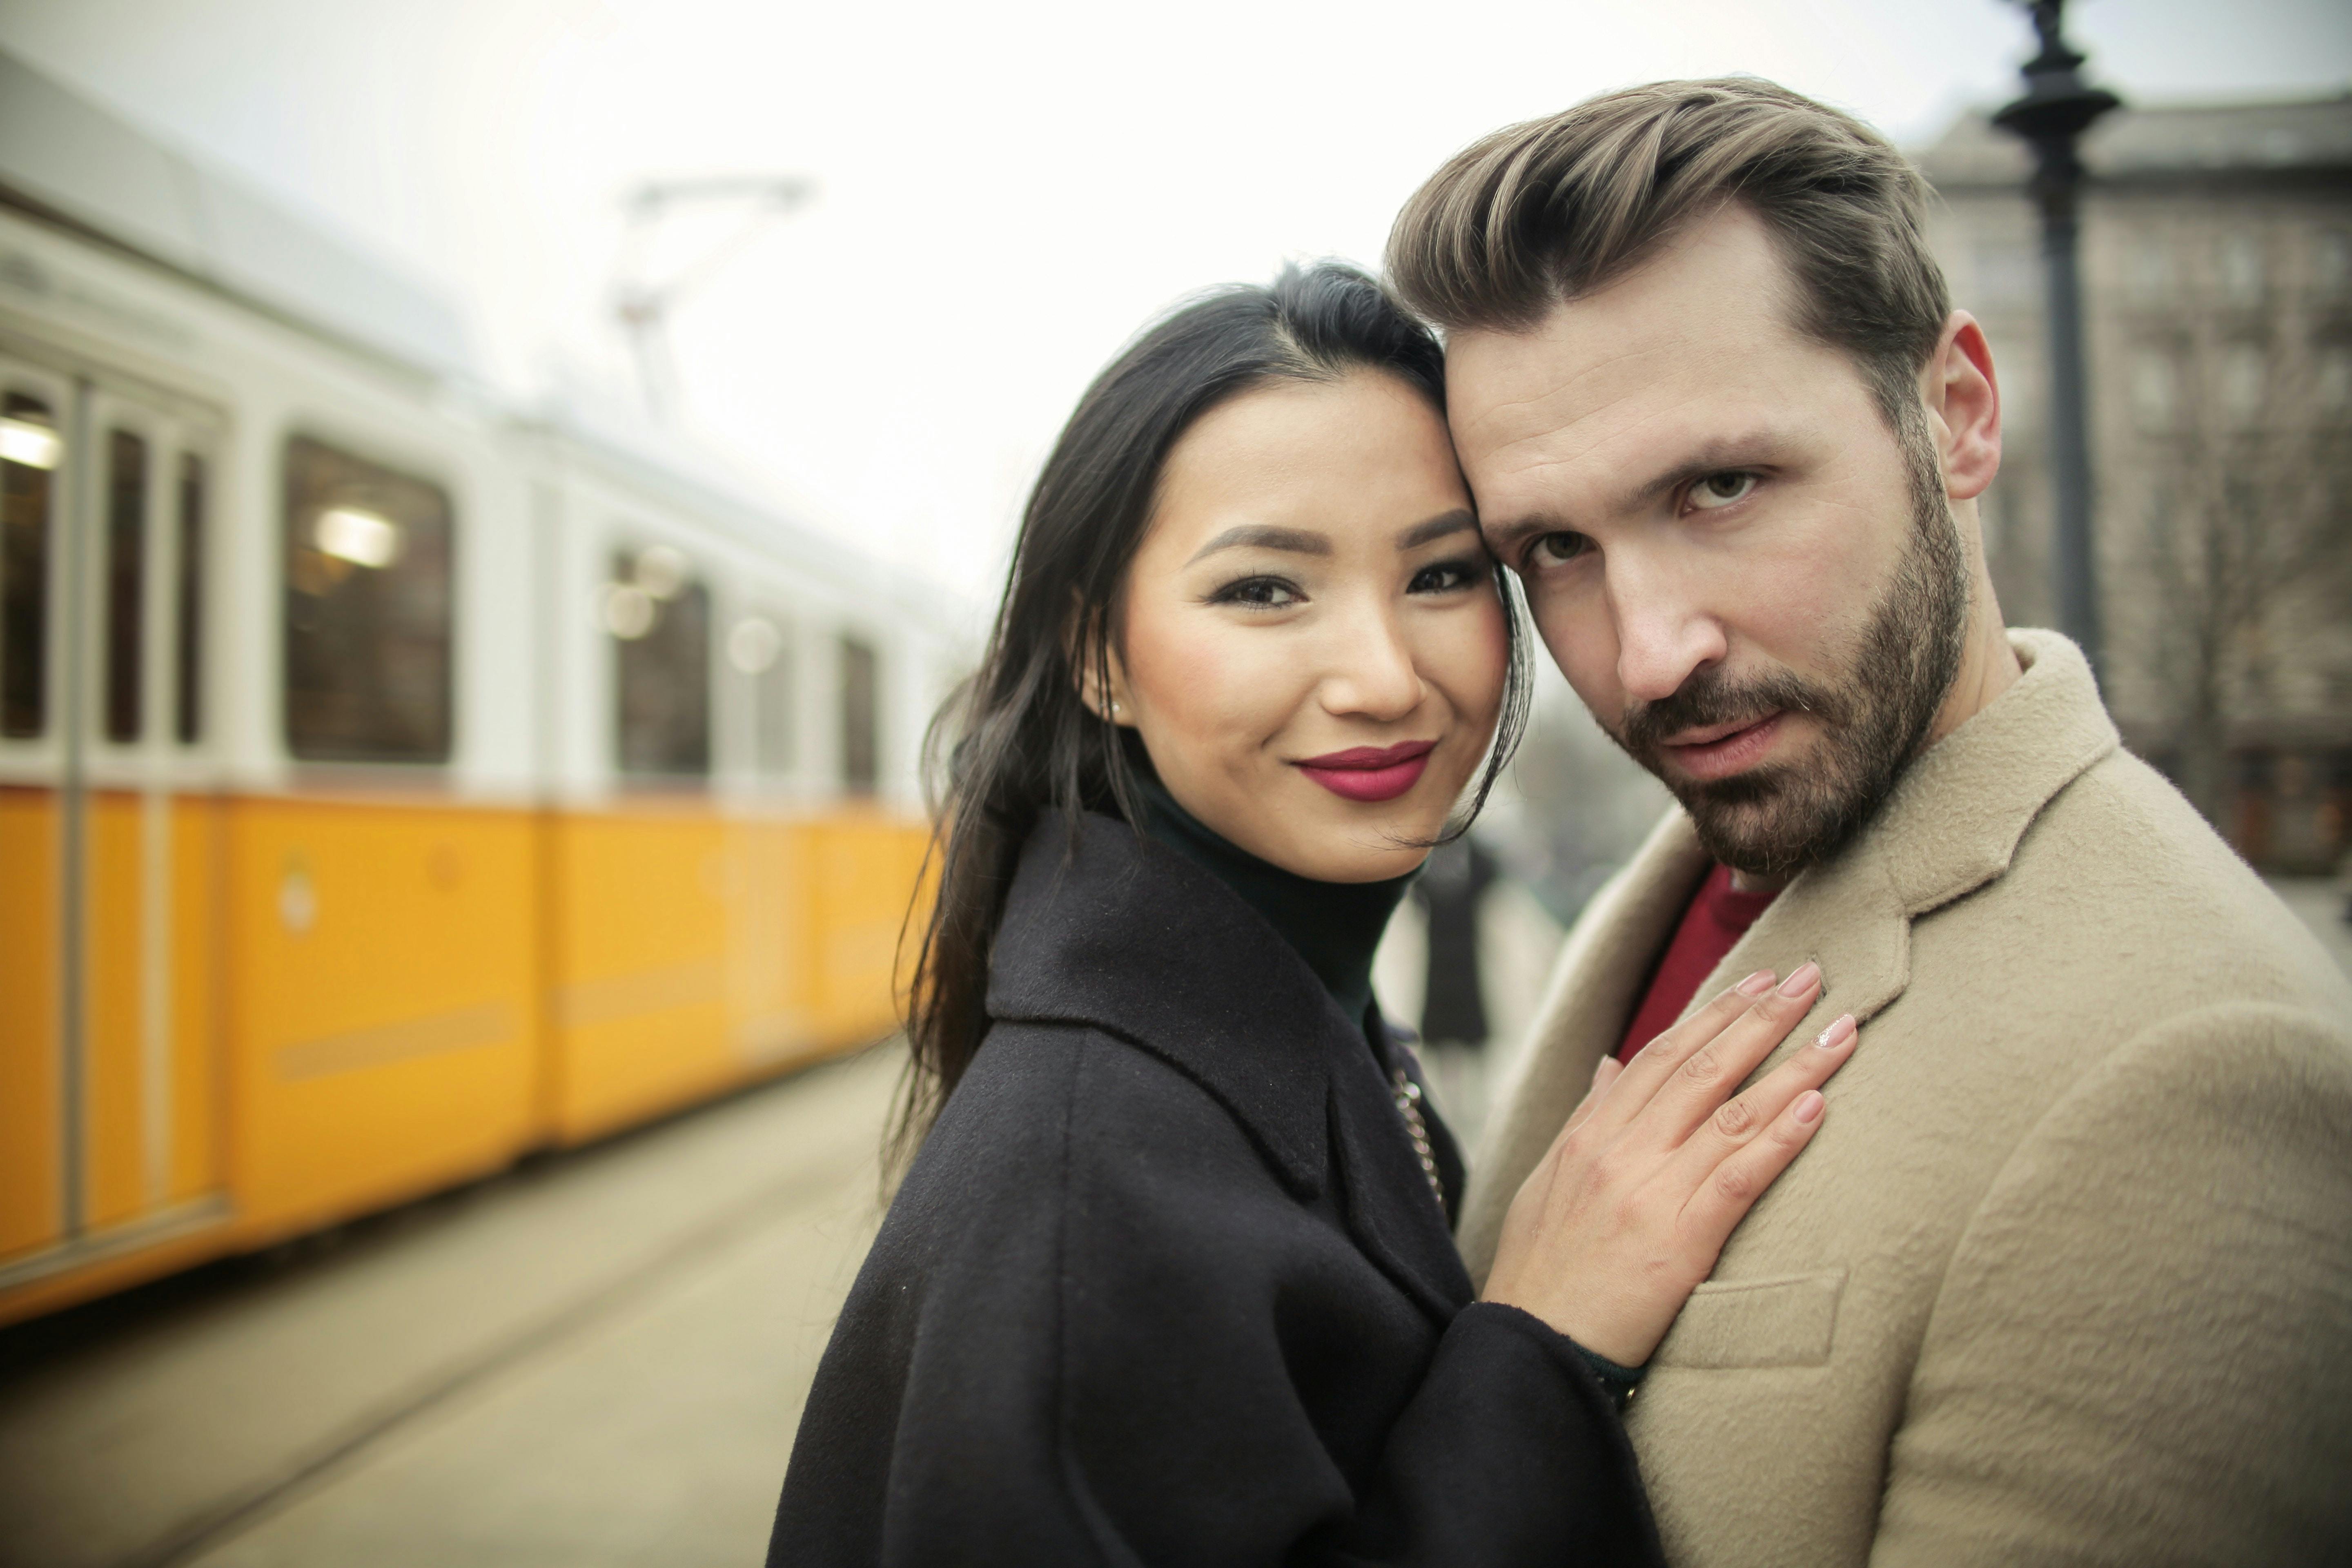 Couple posing next to an electric tram